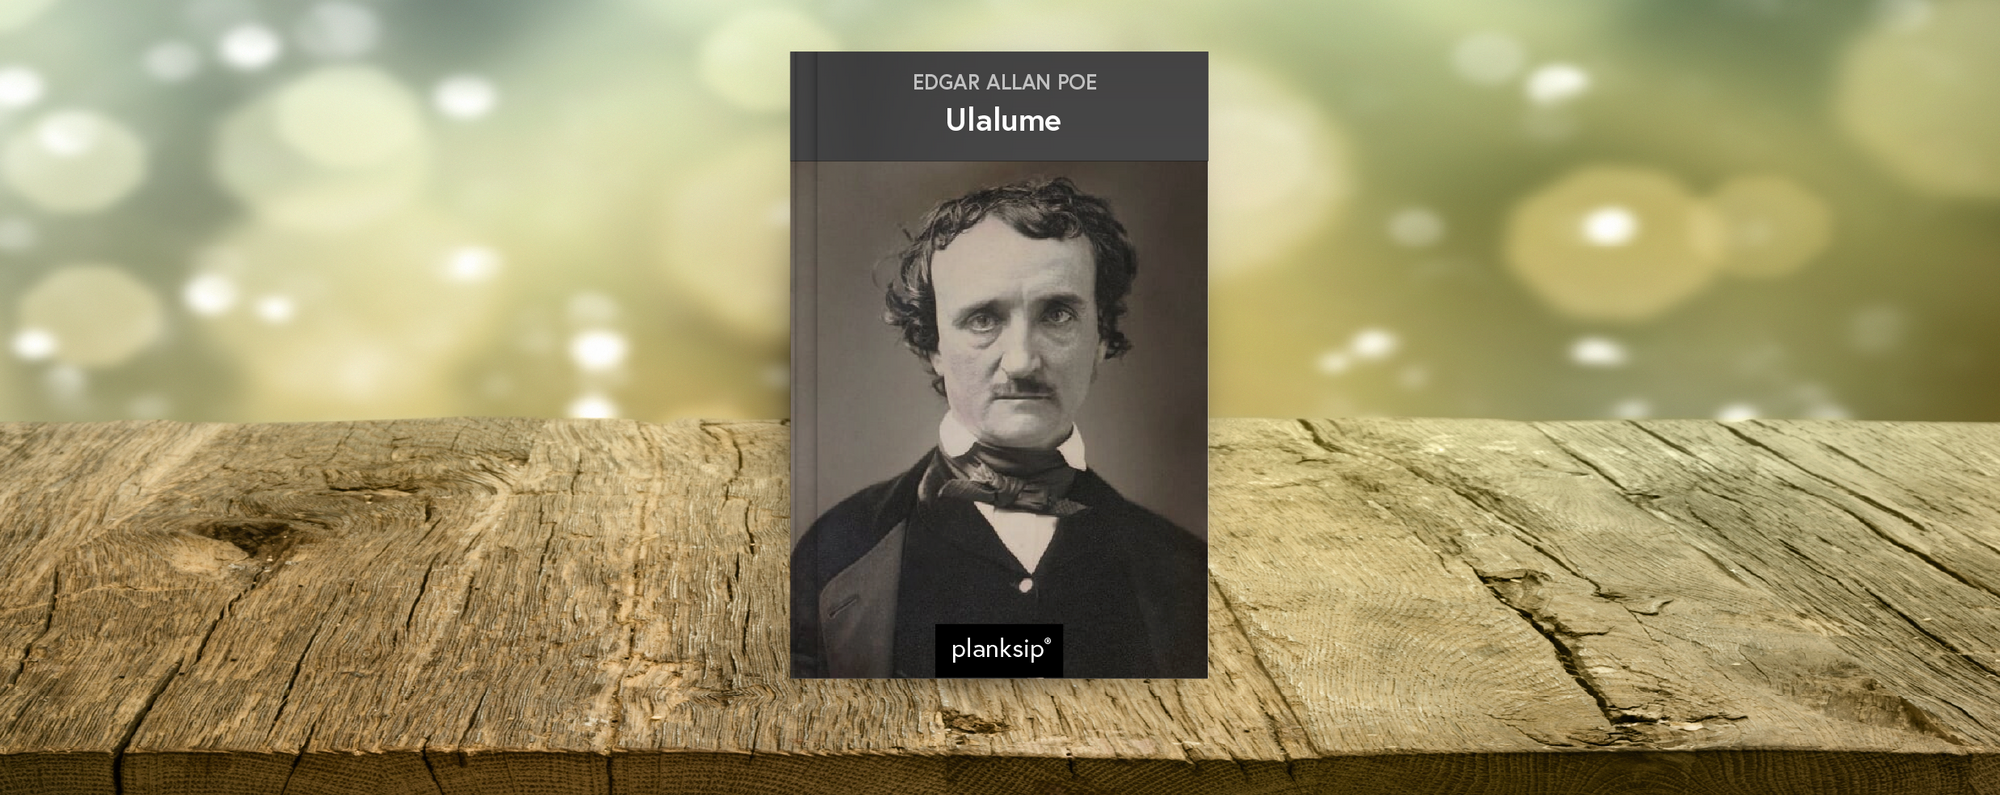 Ulalume by Edgar Allan Poe (REVIEW)